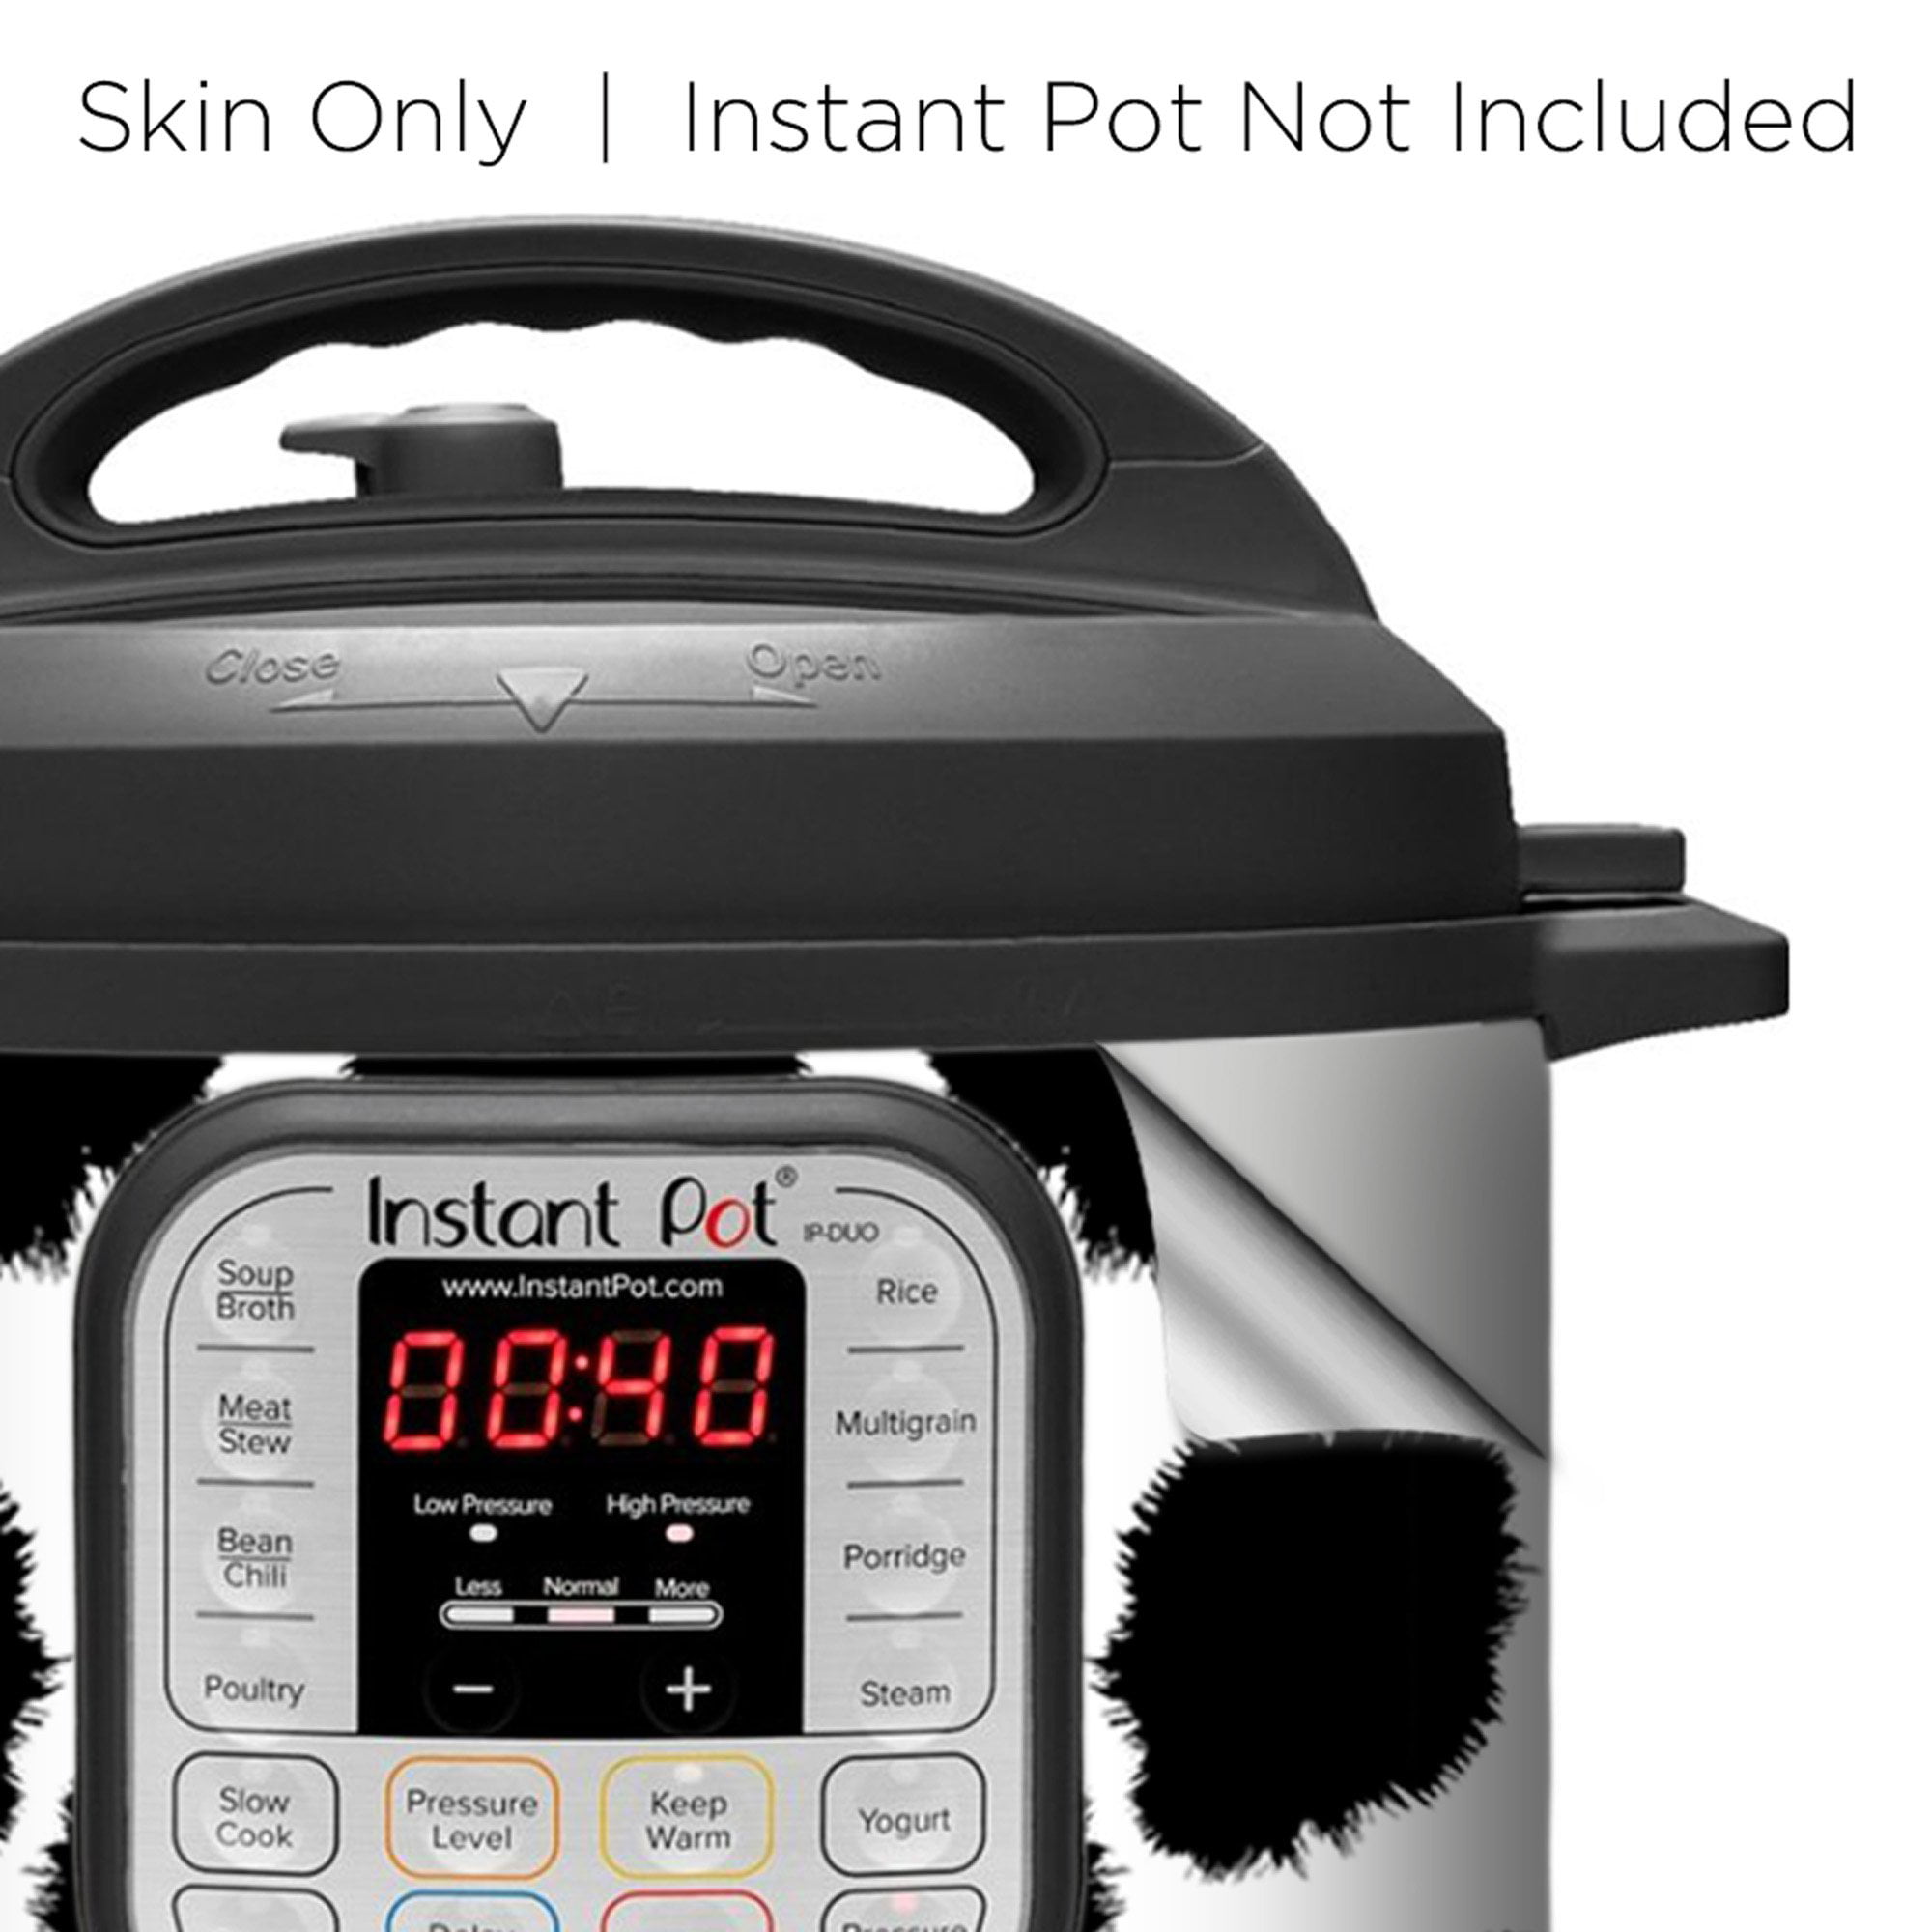 It's A Skin Wrap for Instant Pot Accessories 6 Quart for Duo Evo Plus Cover Sticker | Wraps Fit InstaPot Duo Evo Plus 6 Quart Only | Cow Print Moo